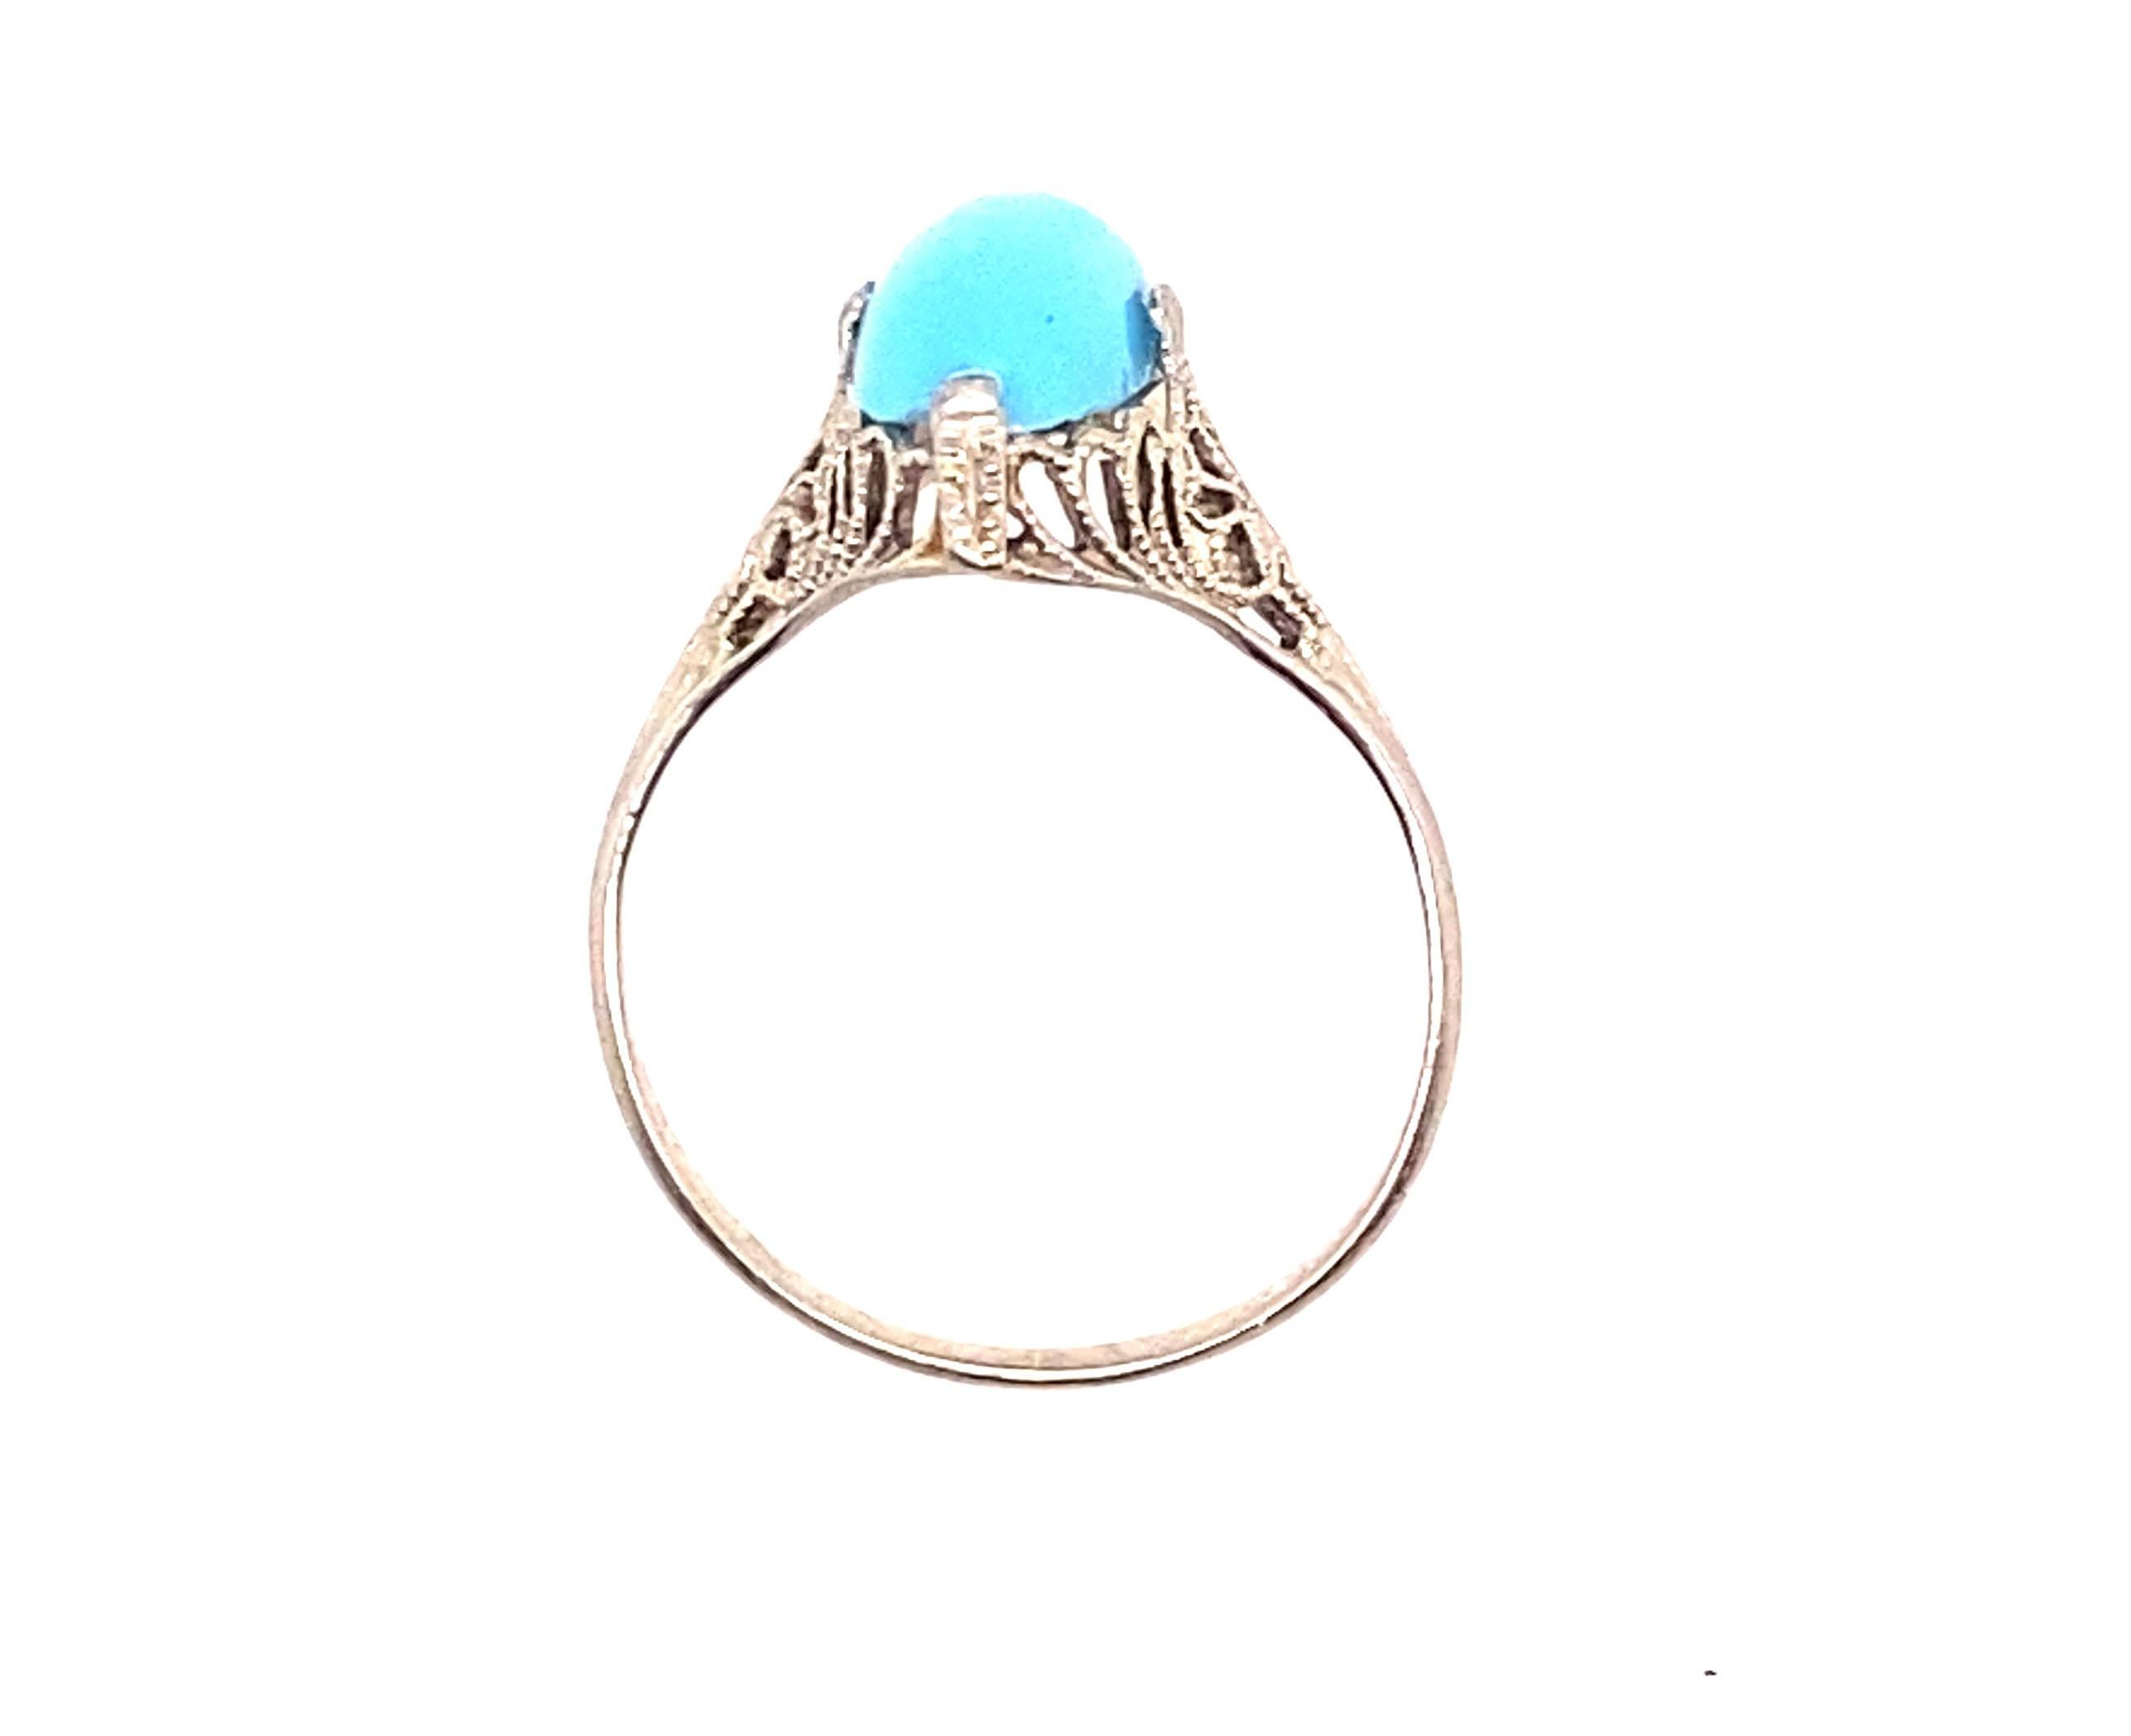 Vintage Turquoise Cocktail Ring 14K White Gold Antique Art Deco Filigree

 

Features a Genuine 12 x 6mm Natural 2.00ct Oval Cabochon Turquoise Gemstone

Hand Engraved Filigree

Perfect for Any Occasion

Solid 14K White Gold 

Circa 1920's

The Art